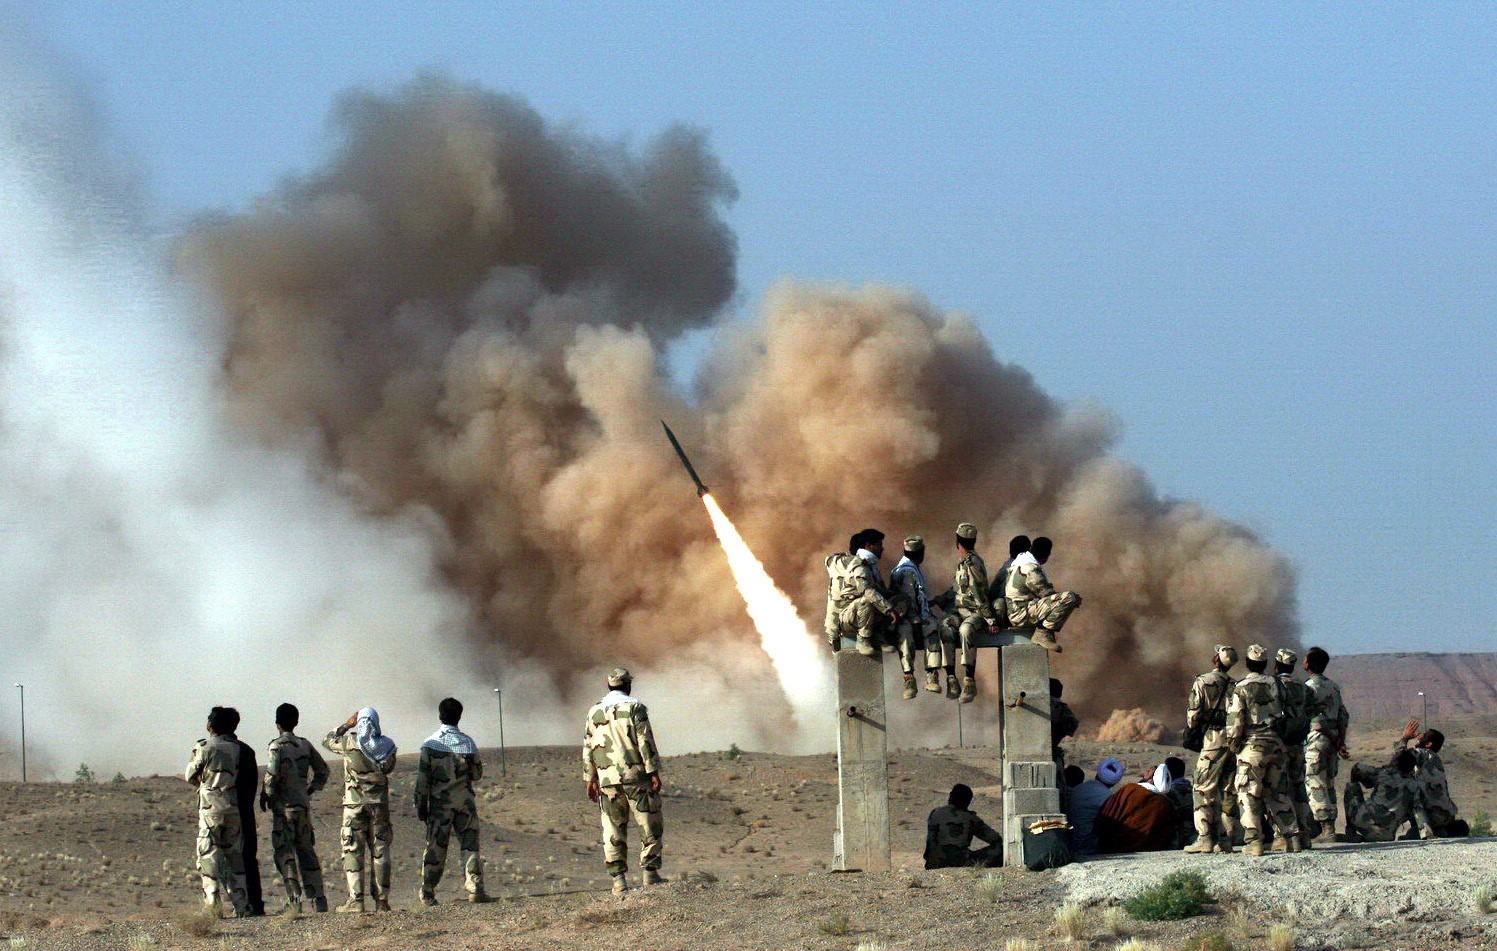 epa08111152 (FILE) - Ballistic missile Zelzal , is launched during the second day of military exercises, codenamed Great Prophet-6, by Iran's elite Revolutionary Guards at an undisclosed location in Iran, 28 June 2011 (Reissued 07 January 2020). According to Iranian state TV on 07 January 2020, Iran's Revolutionary Guard Crops (IRGC) launched a series of rockets targeting Ain al-Assad air base located in al-Anbar, one of the bases hosting US military troops in Iraq. The attack comes days after the Top Irani General Qassem Soleimani, head of the IRGC's Quds force, was killed by a US drone strike in Baghdad.  EPA/STRNGER *** Local Caption *** 02799449